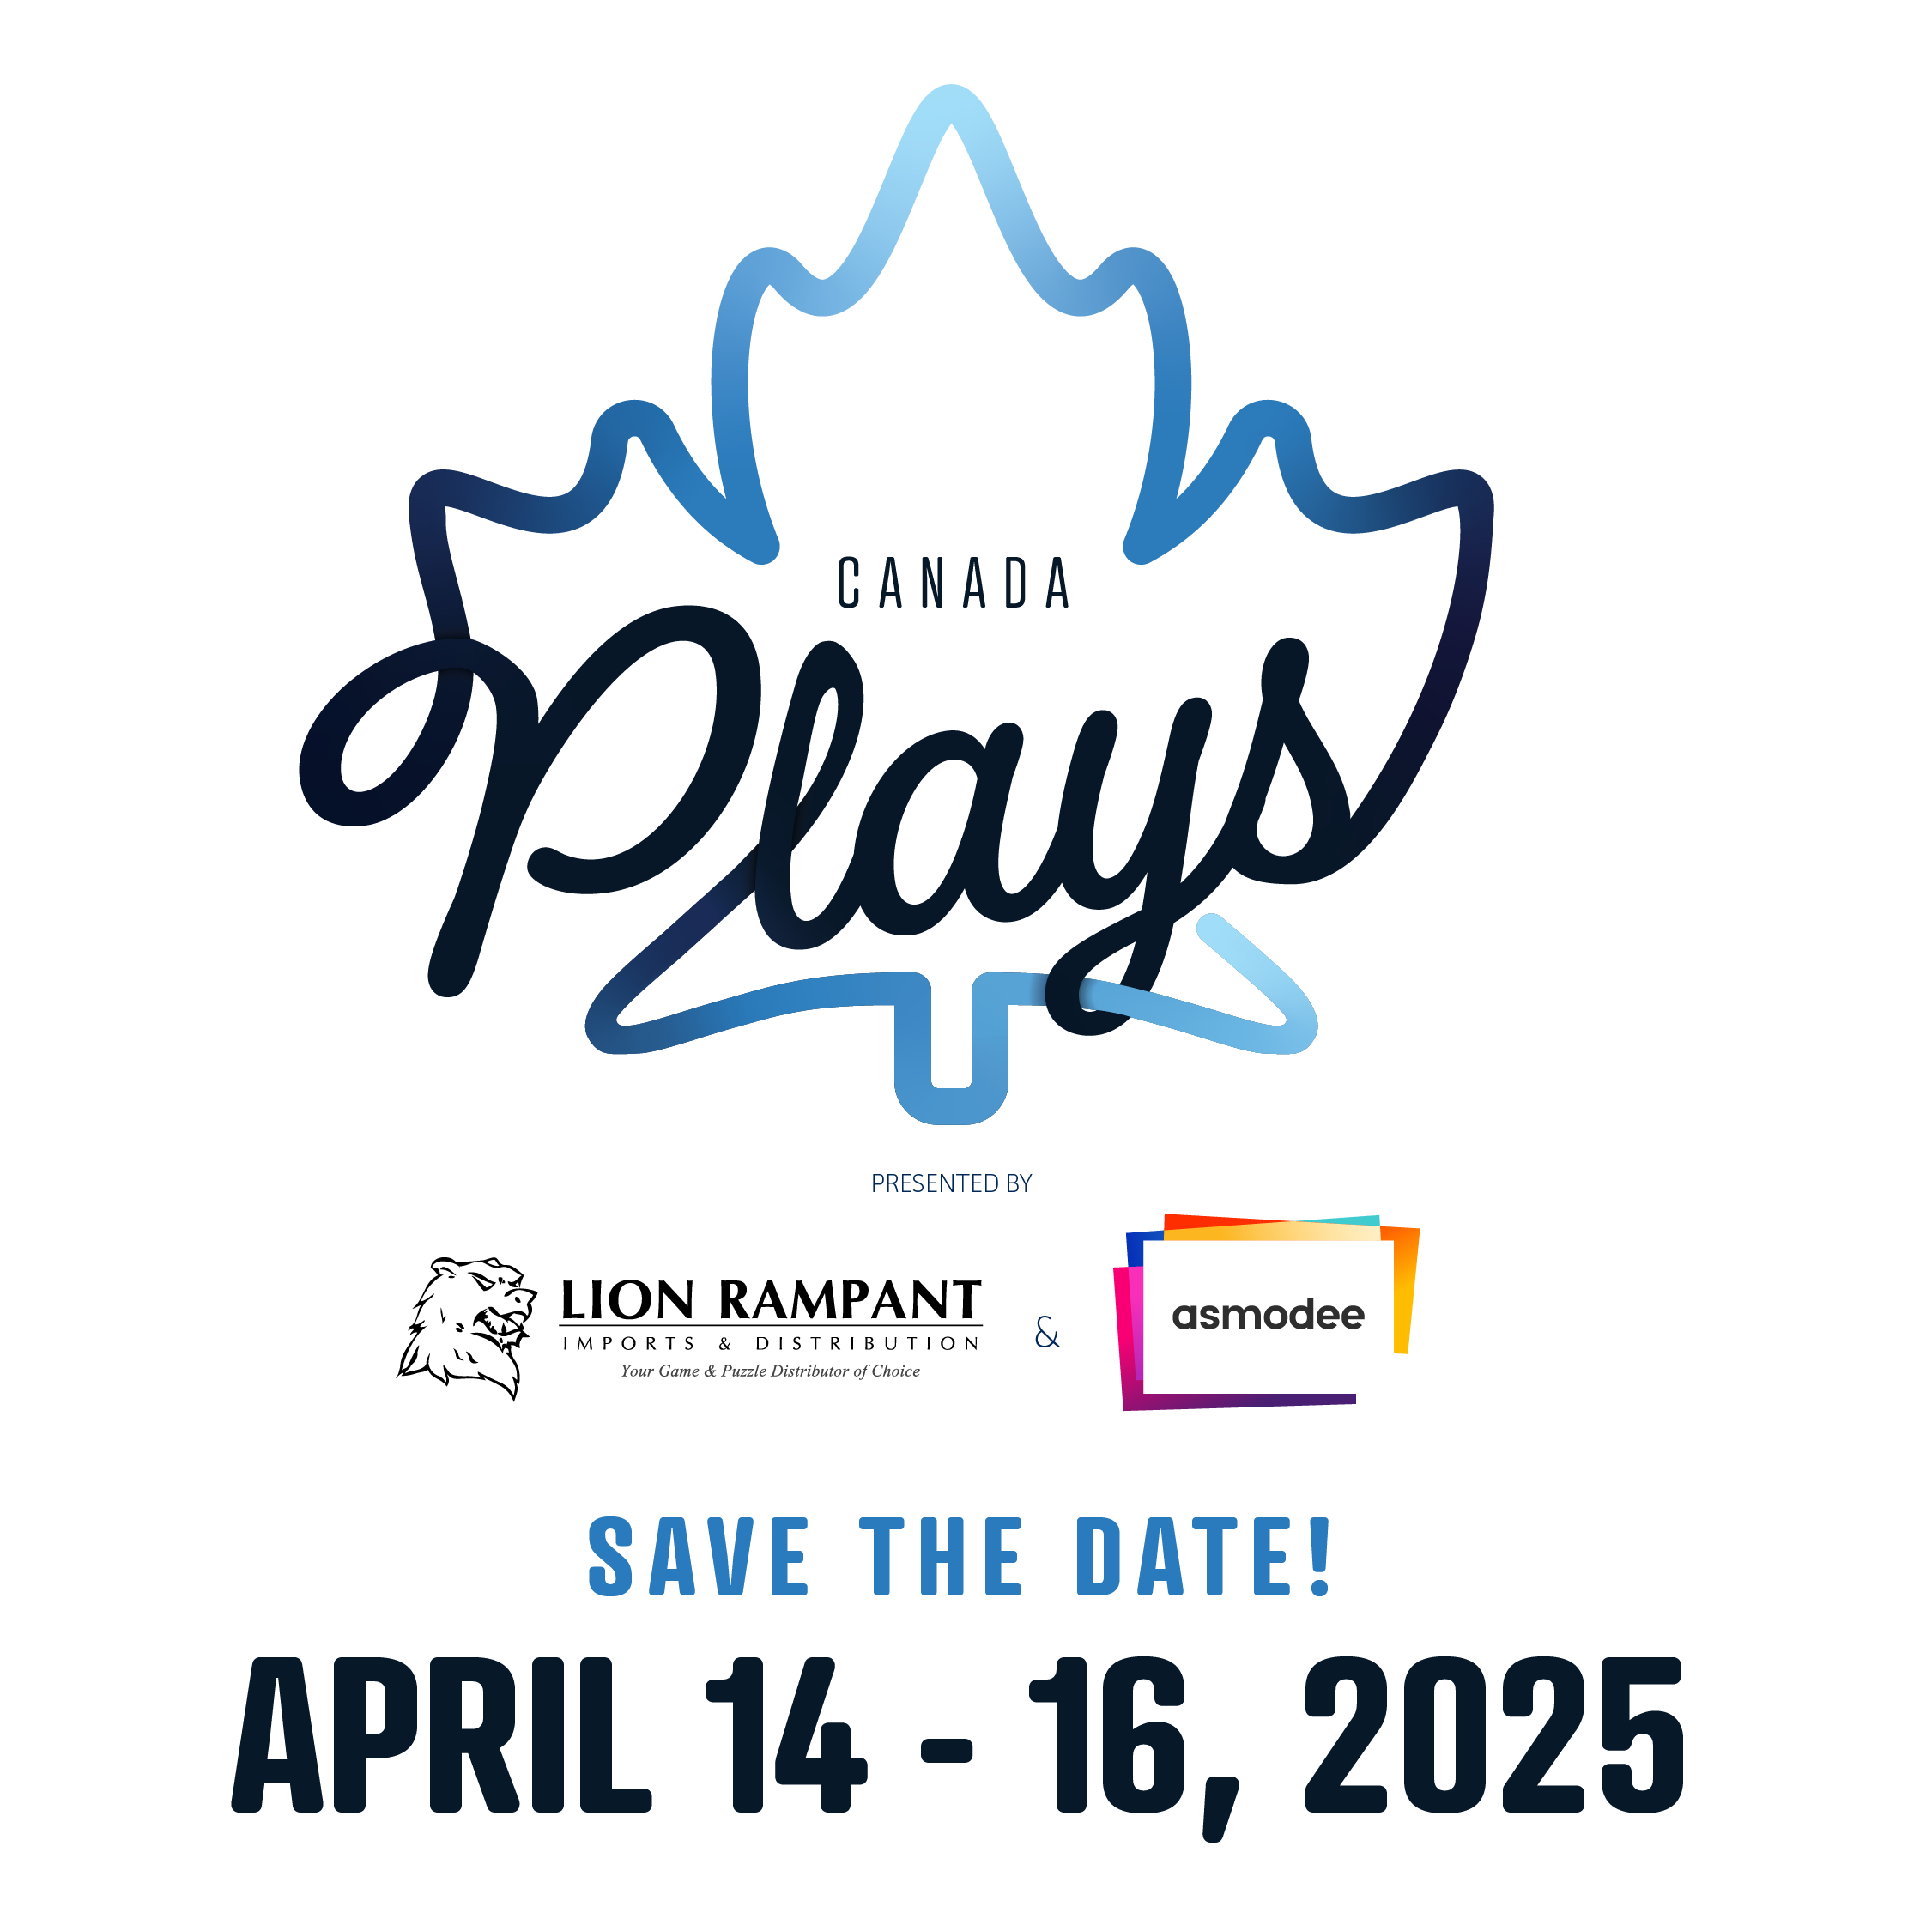 Canada Plays - Save the Date April 14-16, 2025